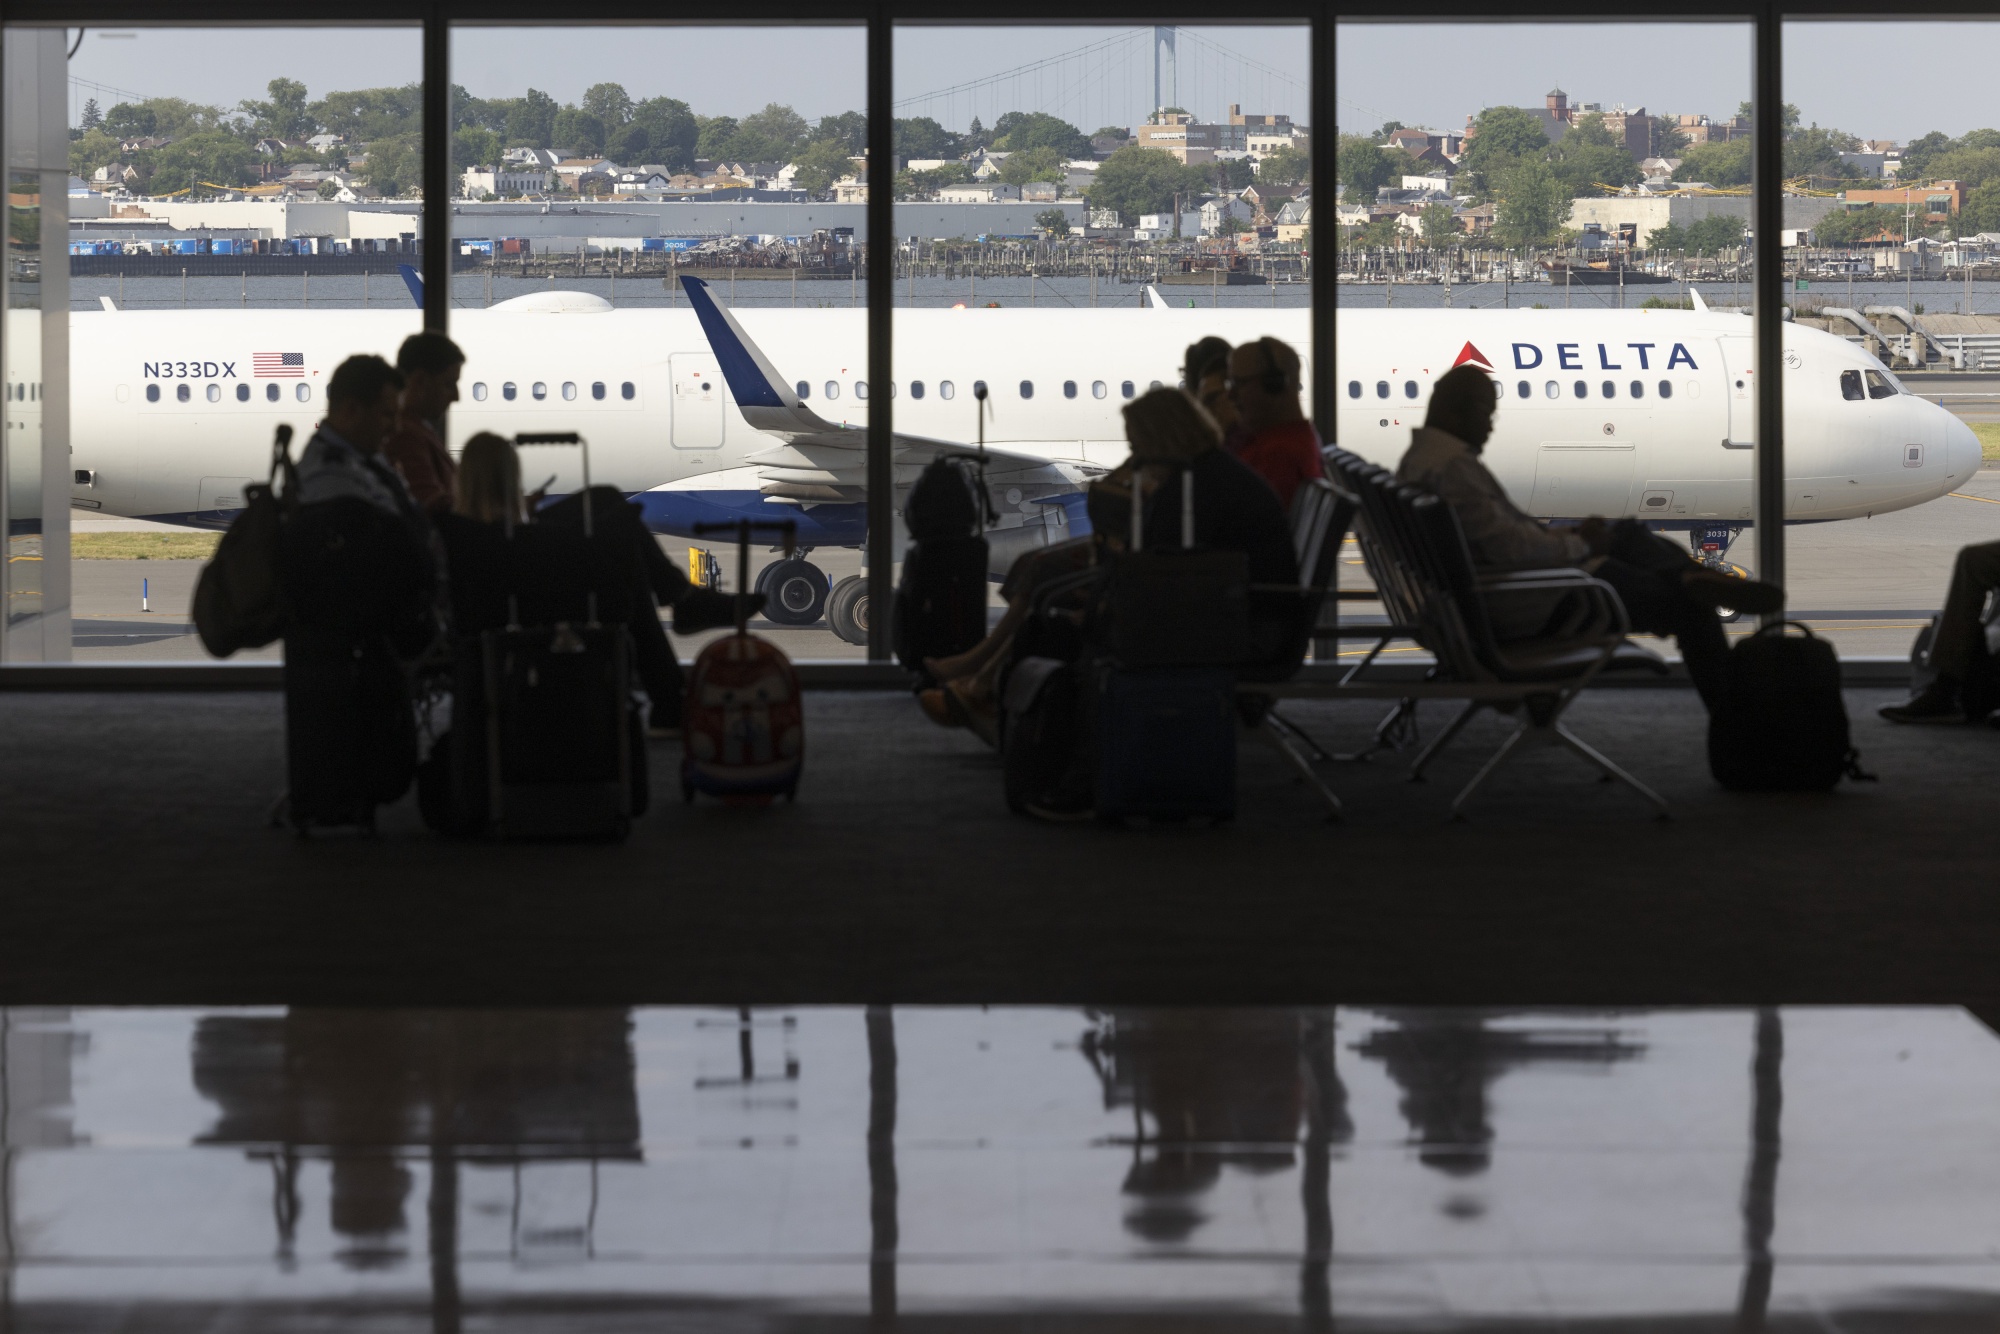 Expedia's 2023 Air Travel Hacks Report: U.S. travelers can save on